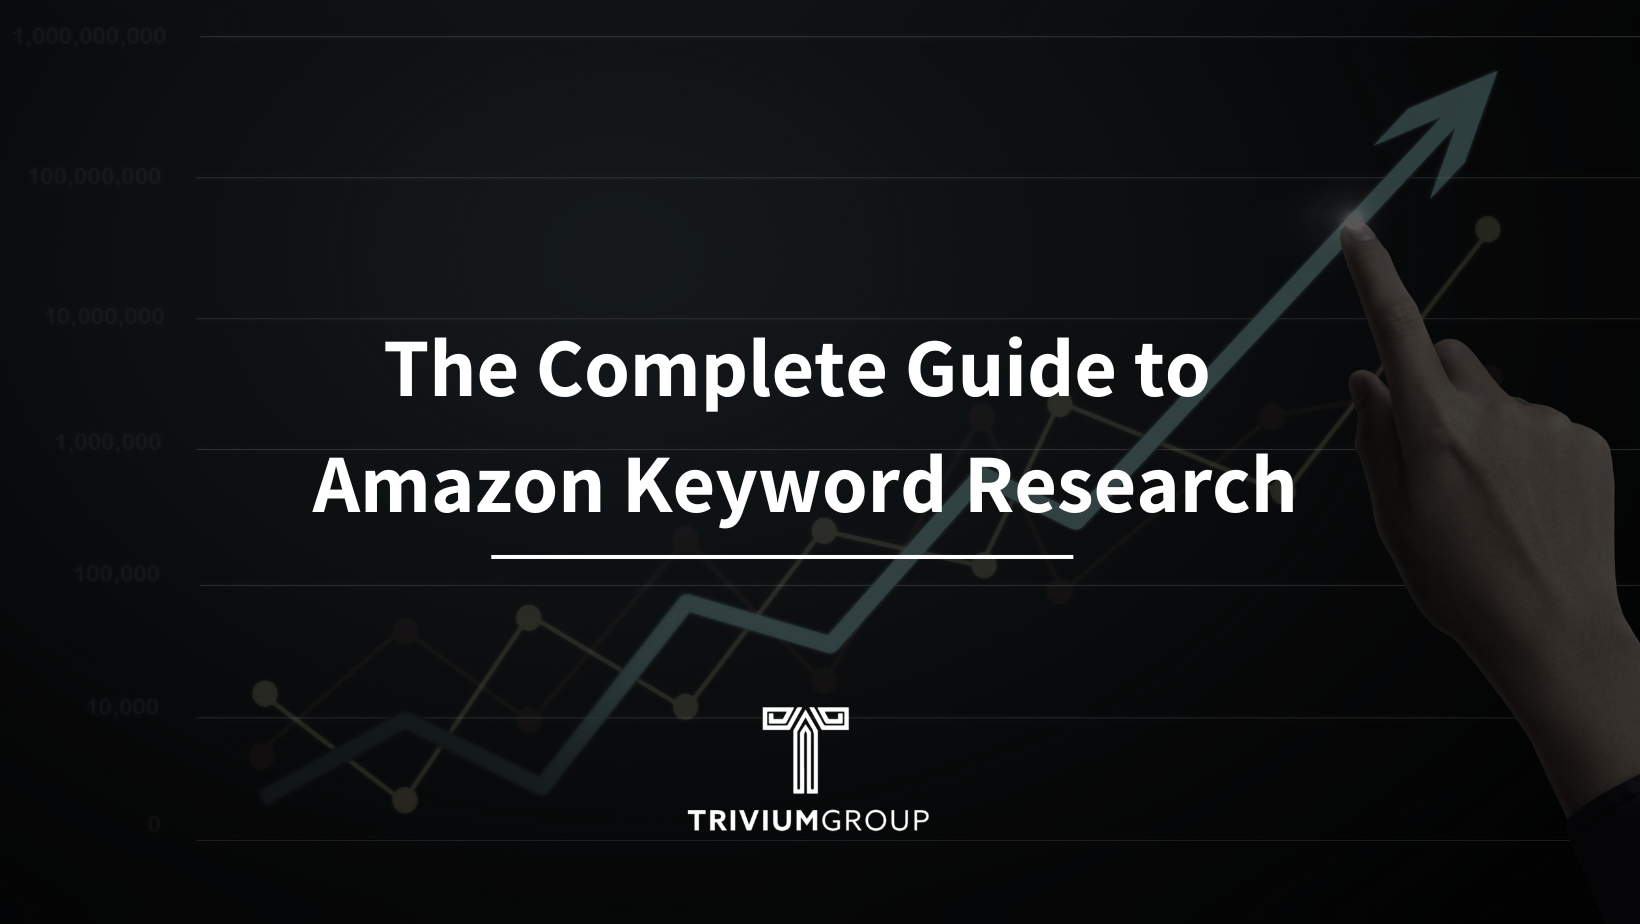 The Complete Guide to Amazon Keyword Research